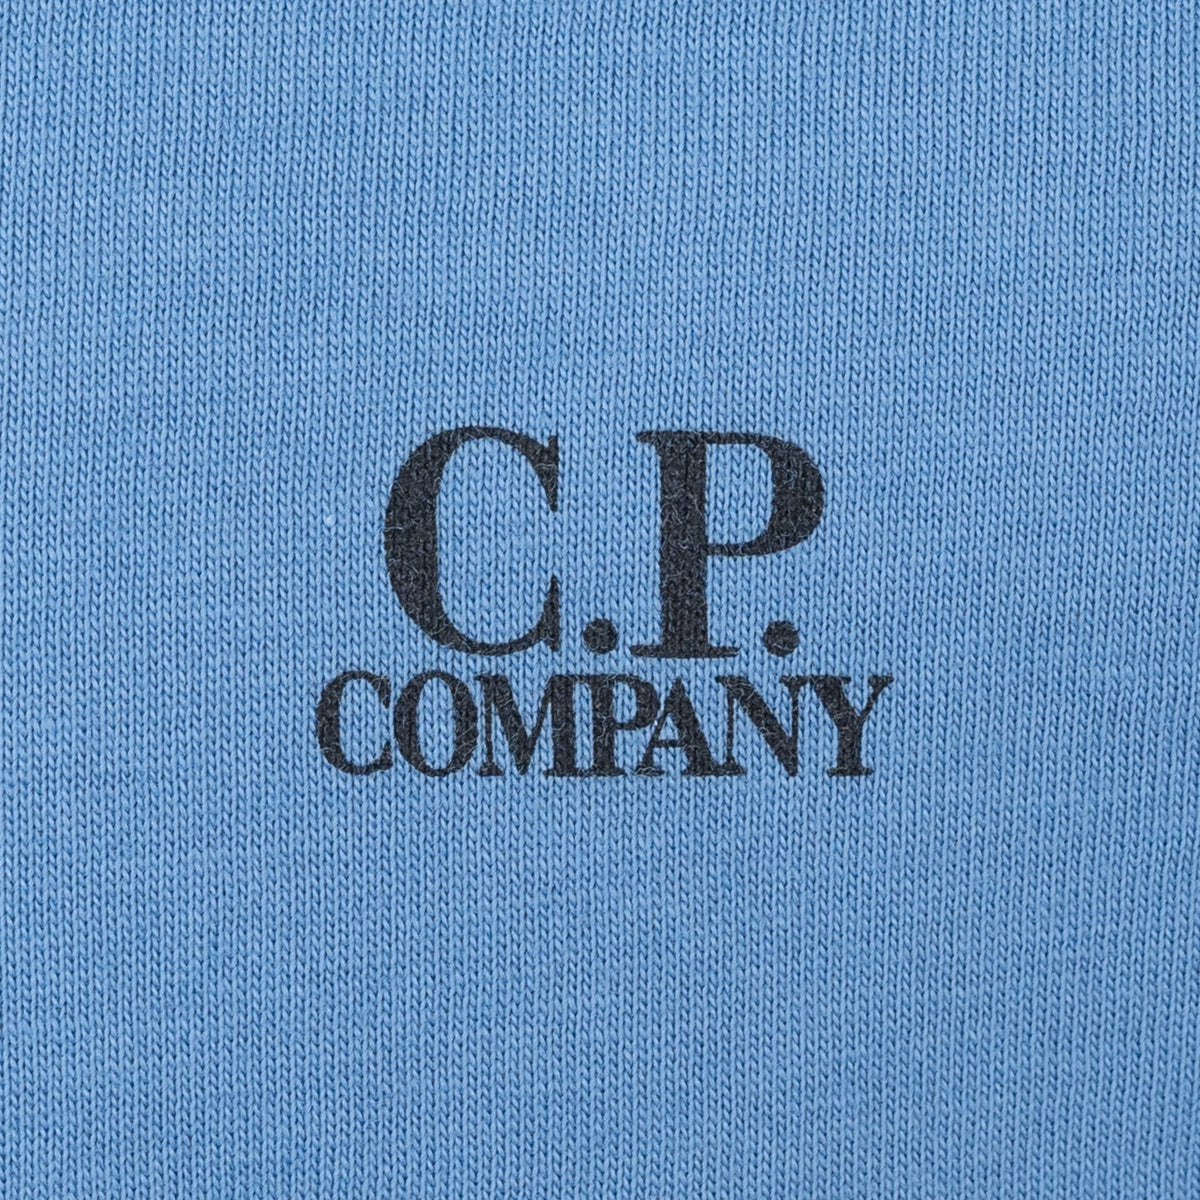 Load image into Gallery viewer, C.P. Company Riviera Blue 30/1 Small C.P. Logo Tee
